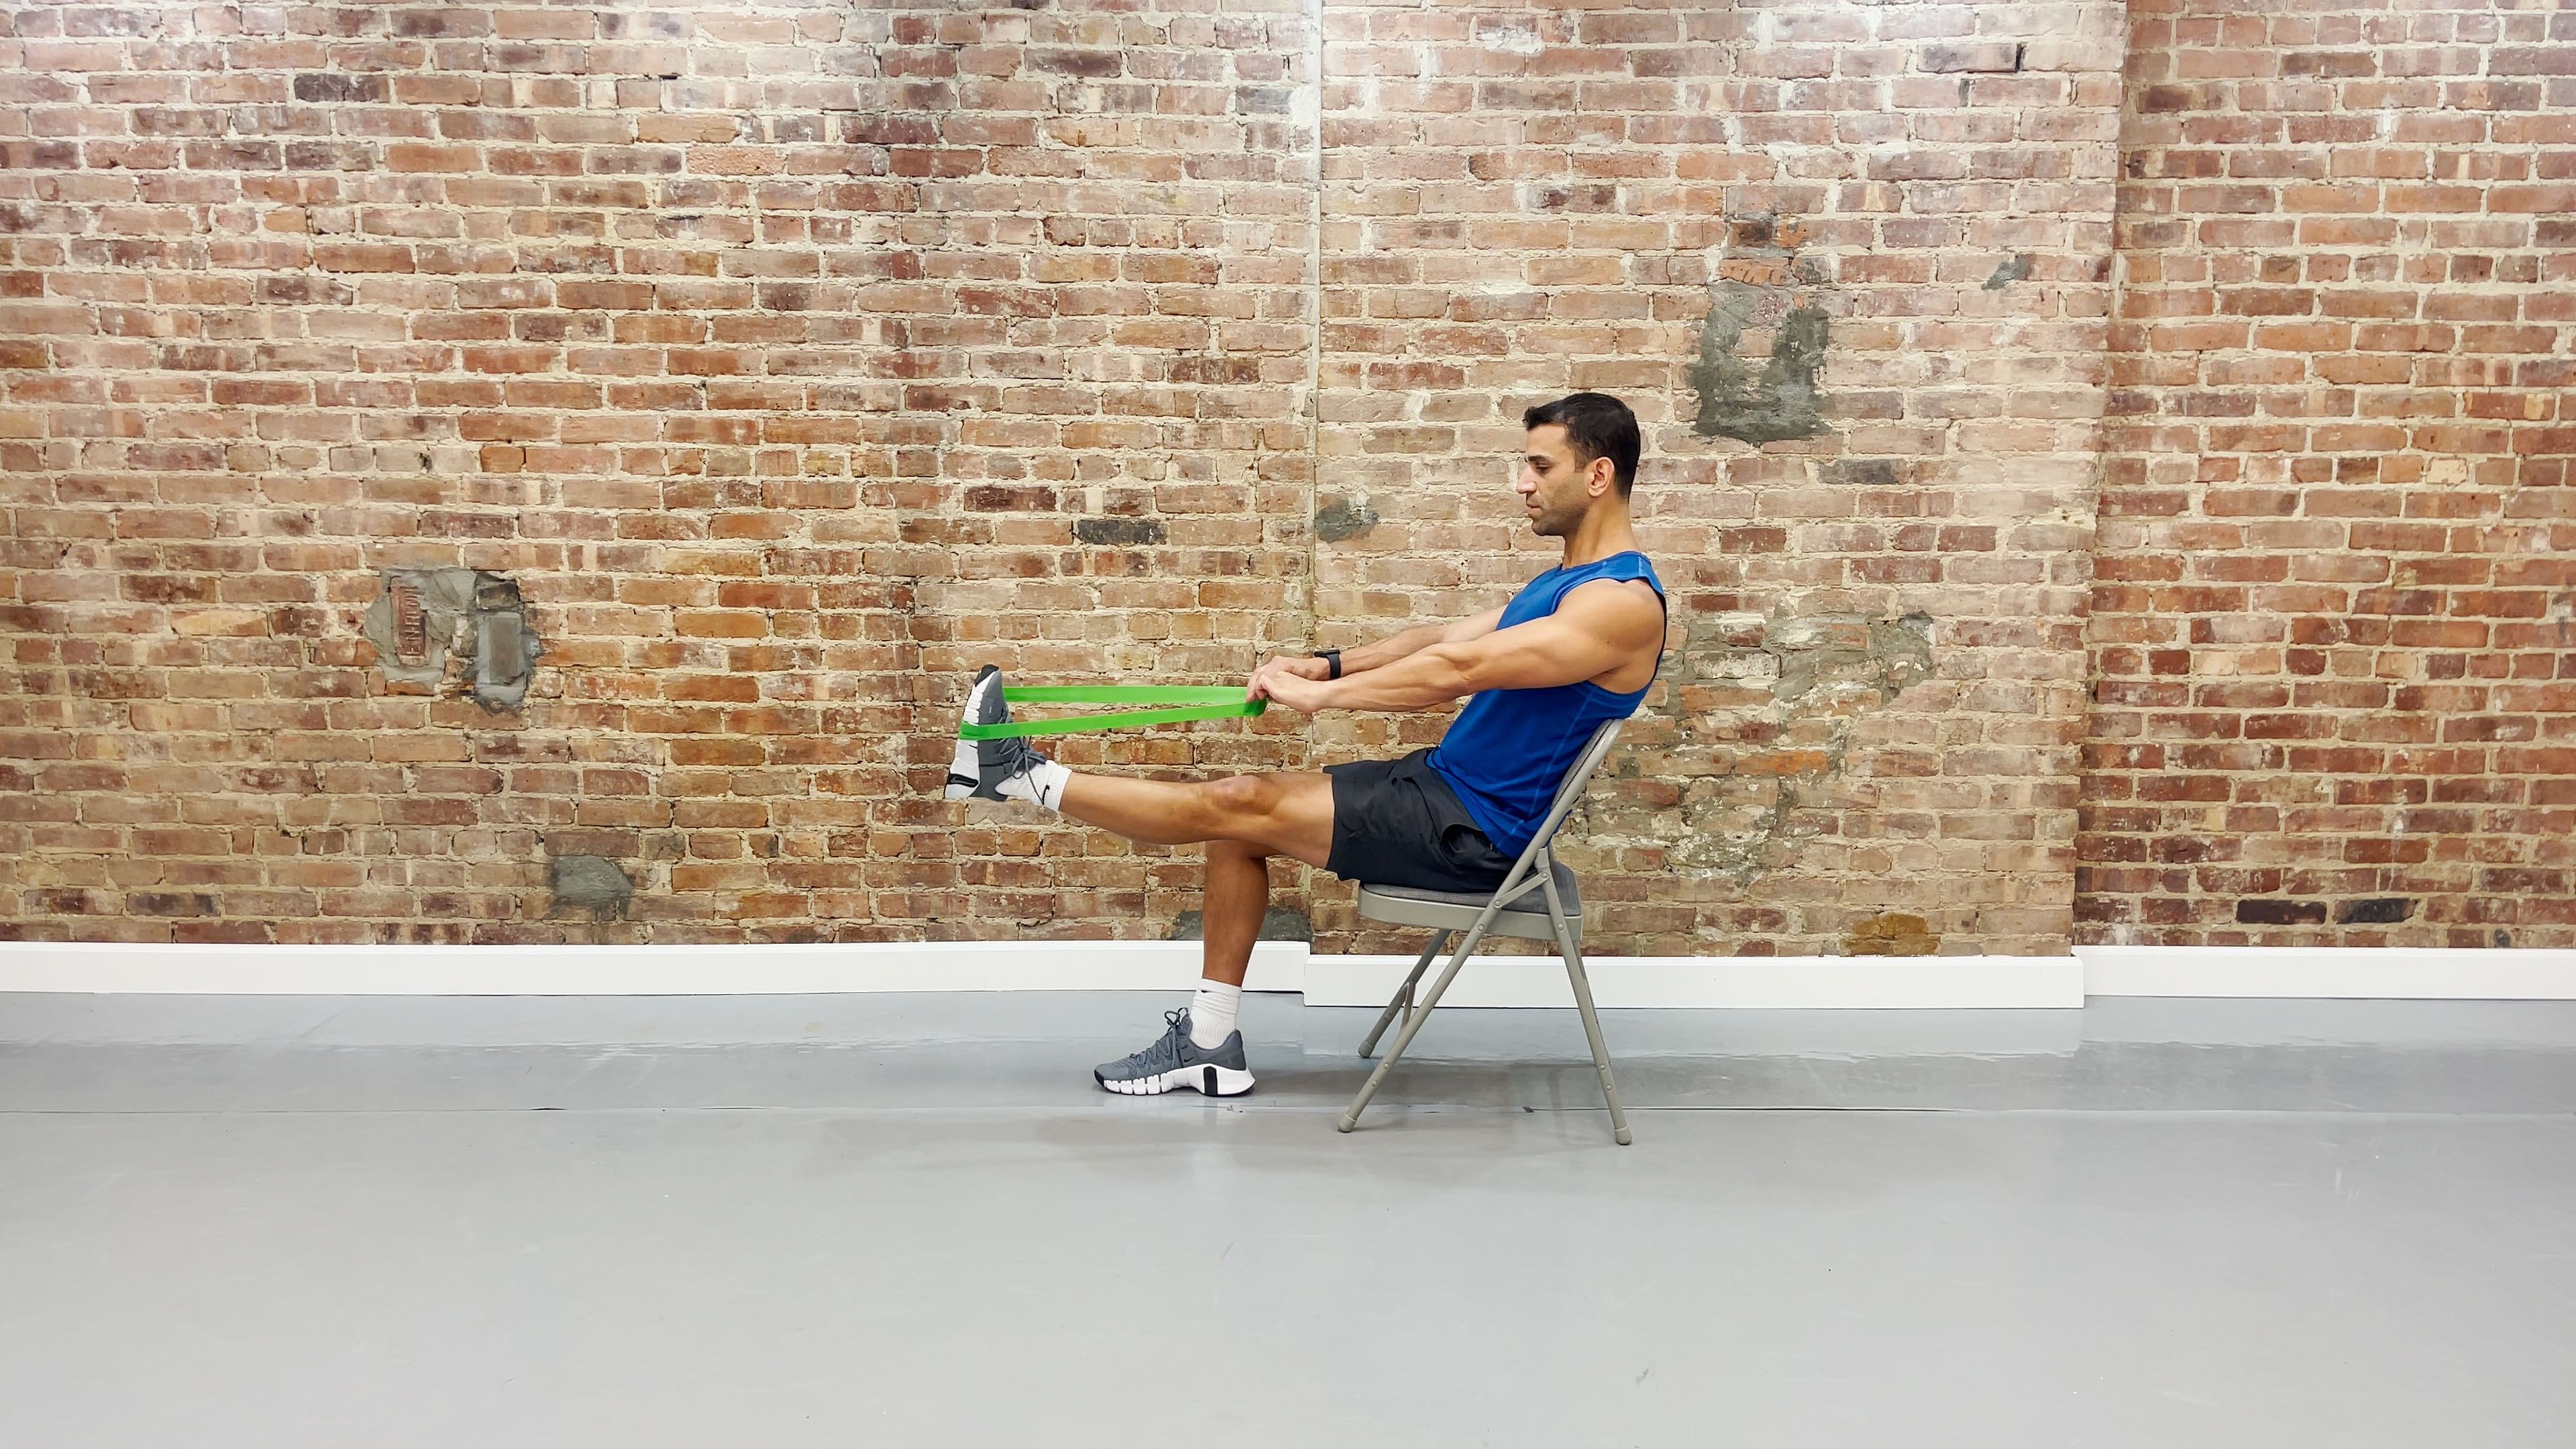 Slider Core Exercises: 6 Moves for More Stability